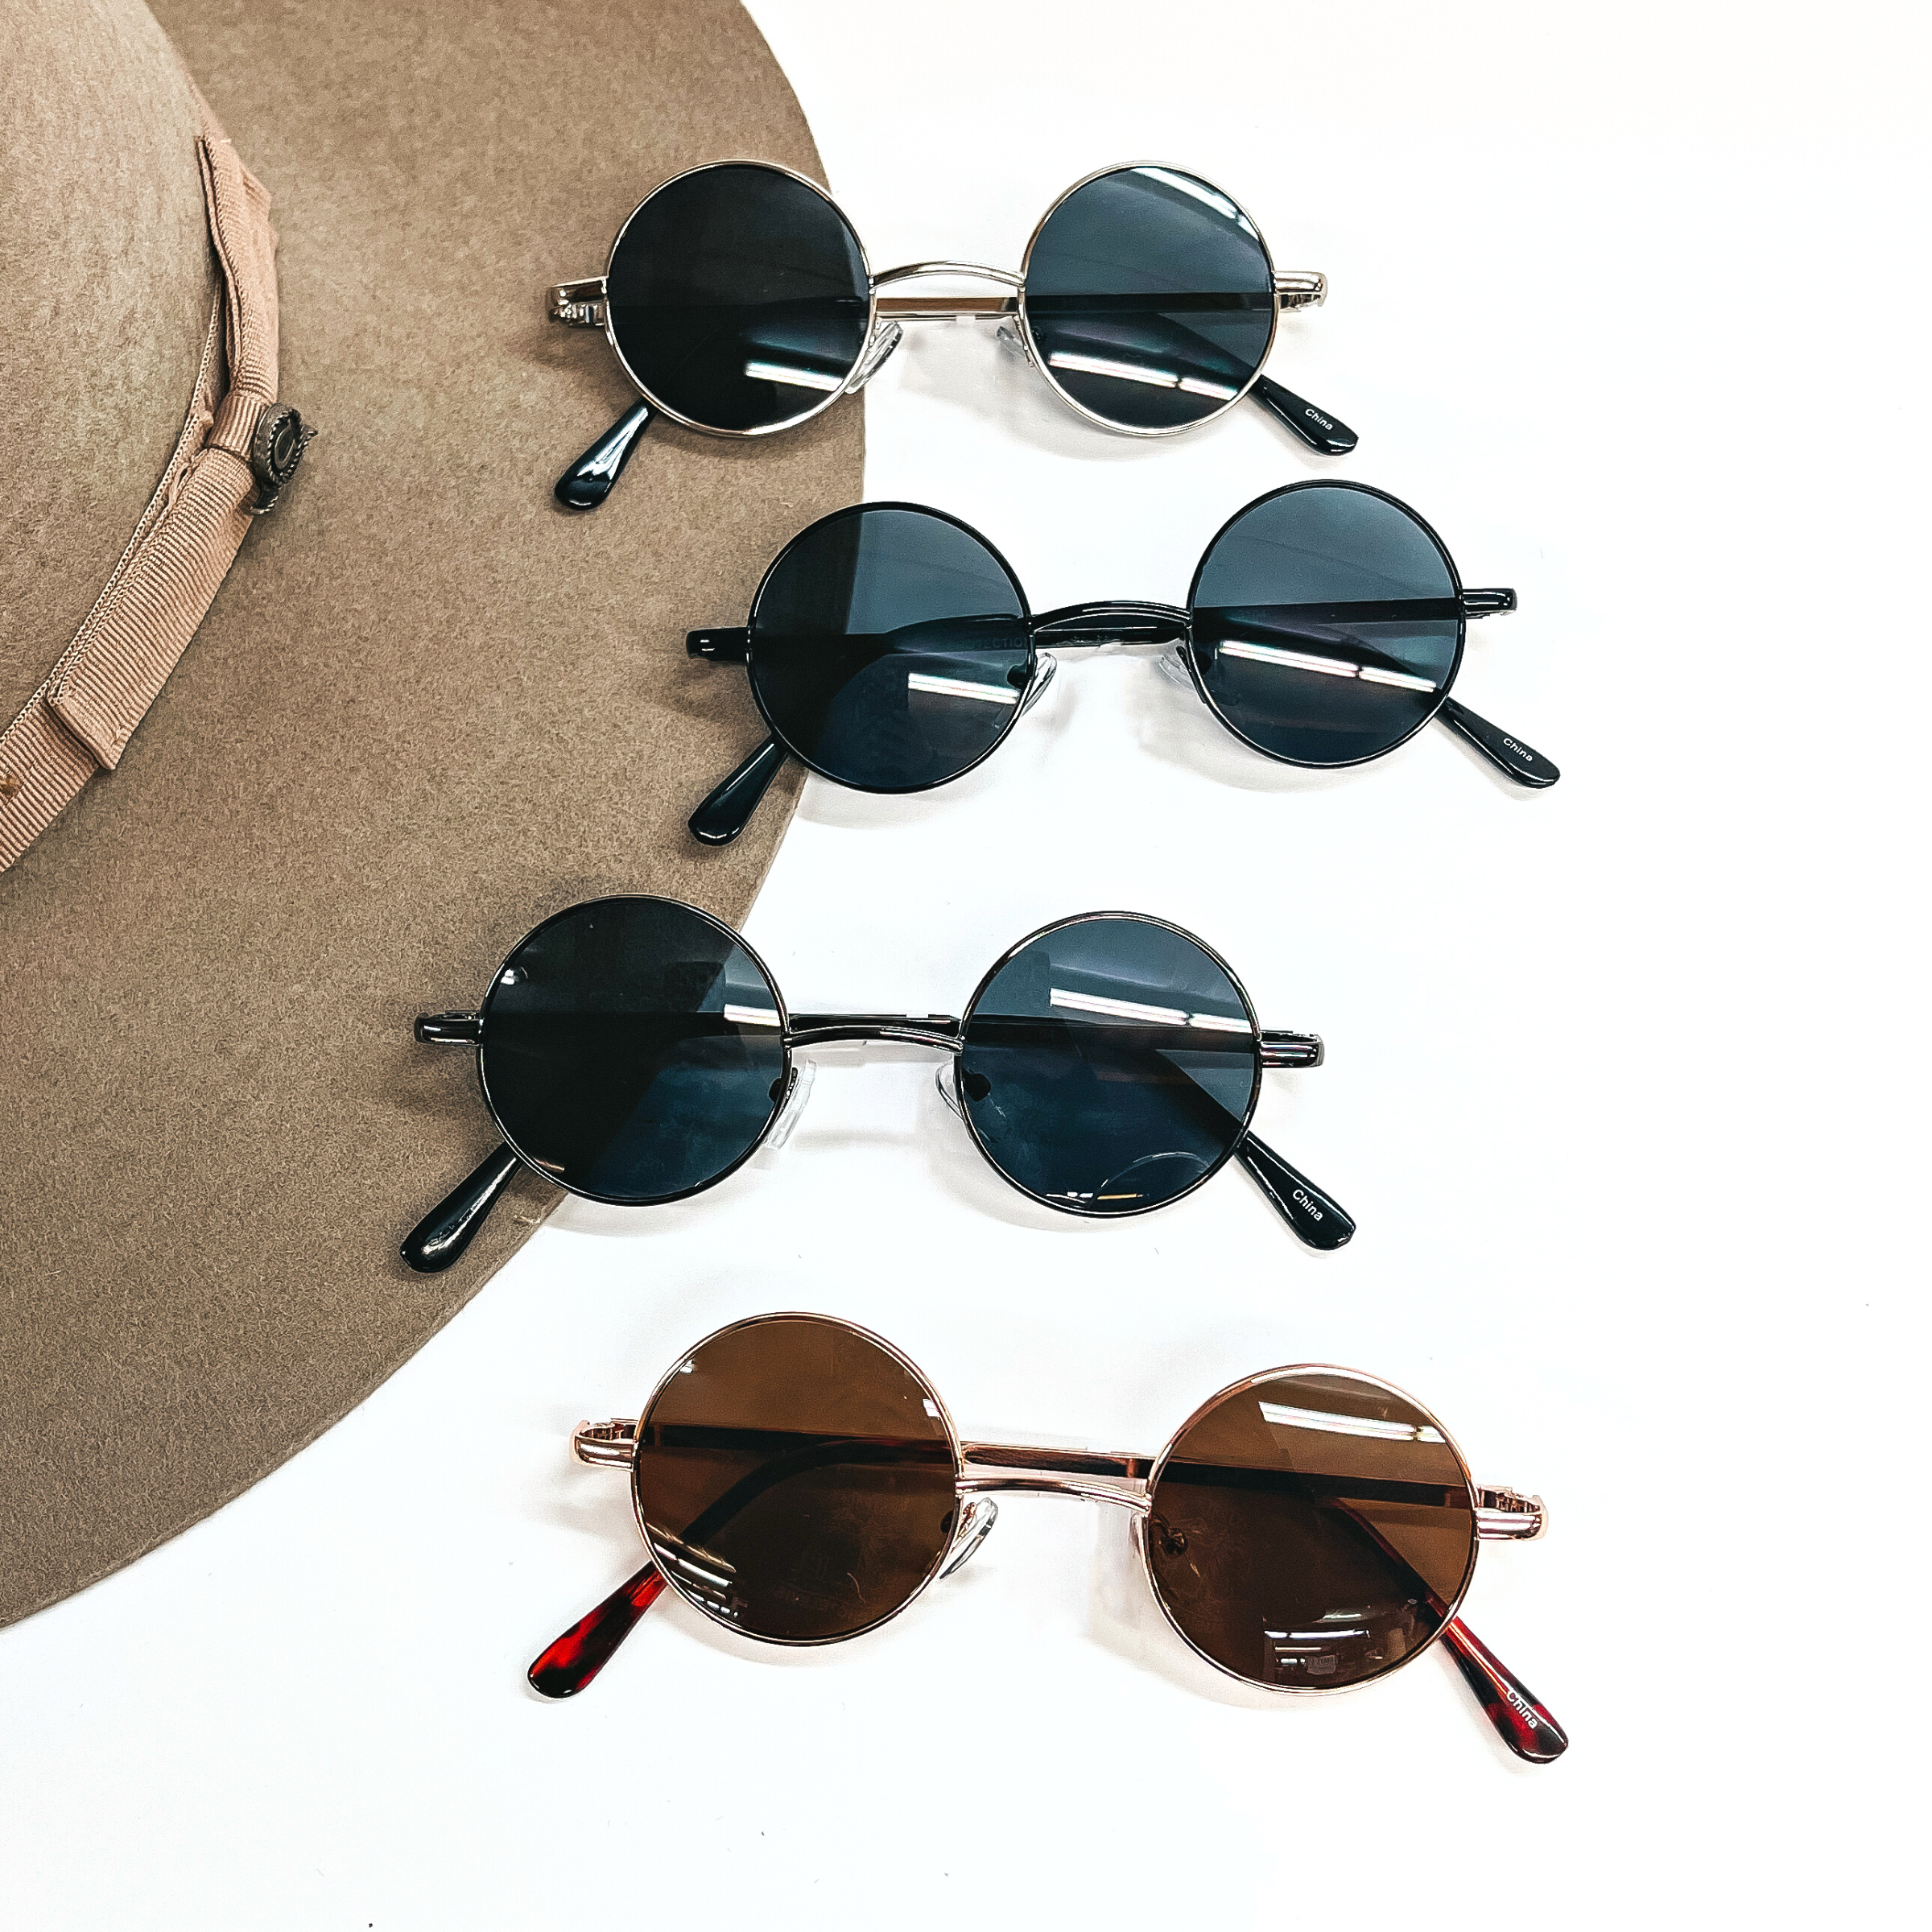 There are four pairs of sunglasses with circle lenses in different colors and frames. There are four different frame lenses in silver, black, gunmetal, and rose gold. All four pairs of sunglasses are taken on top of a white background and with a a sand felt hat in the side as decor.